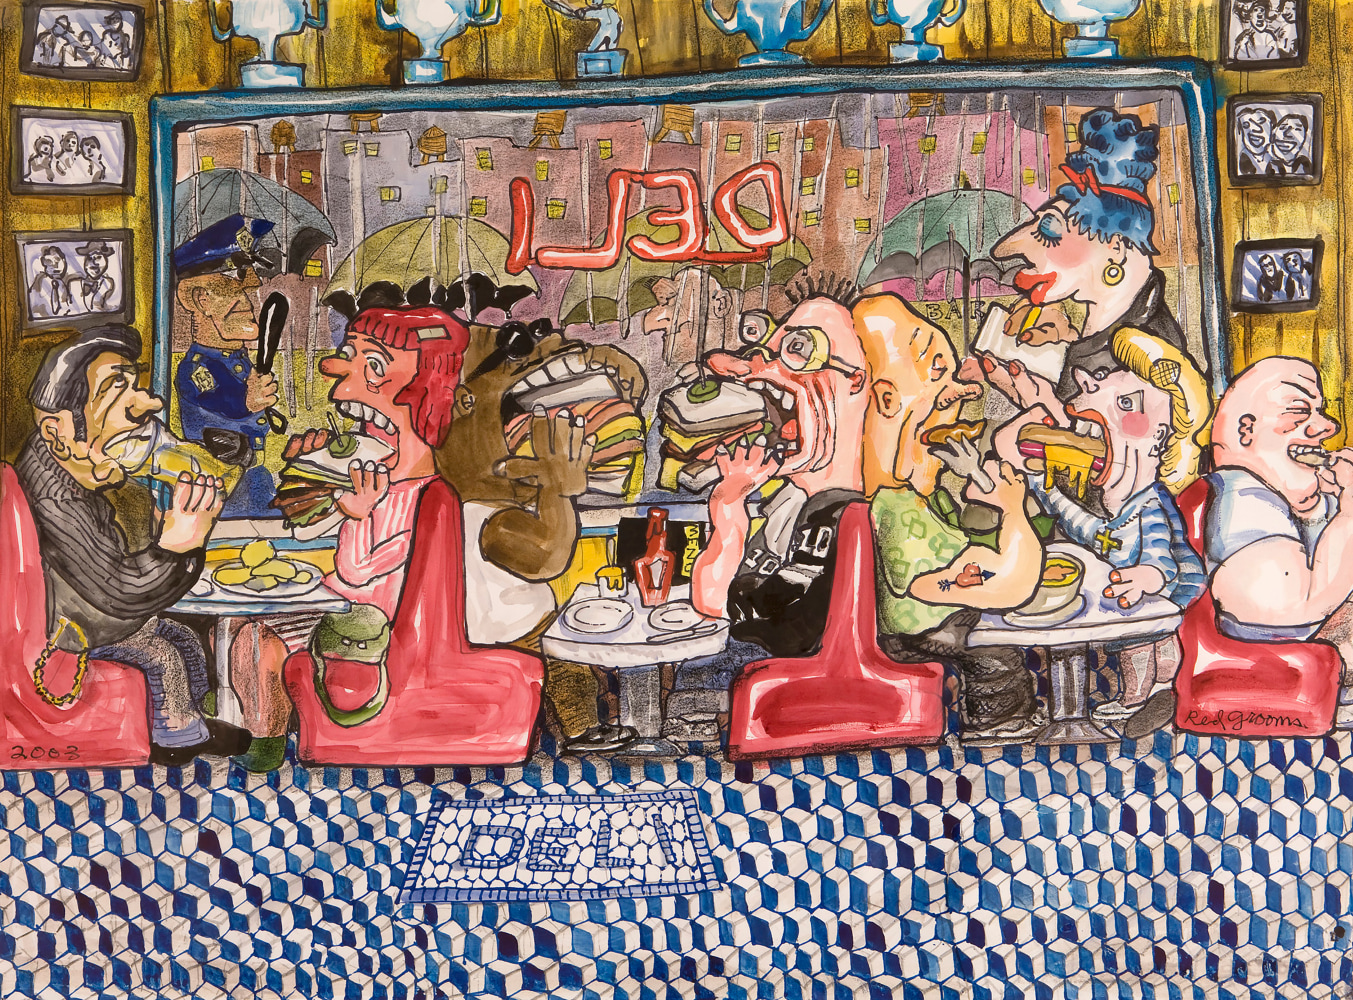 Ink and crayon on paper artwork by Red Grooms of people eating inside of a deli and emphasizing their large bites of food such as sandwiches and hot dogs